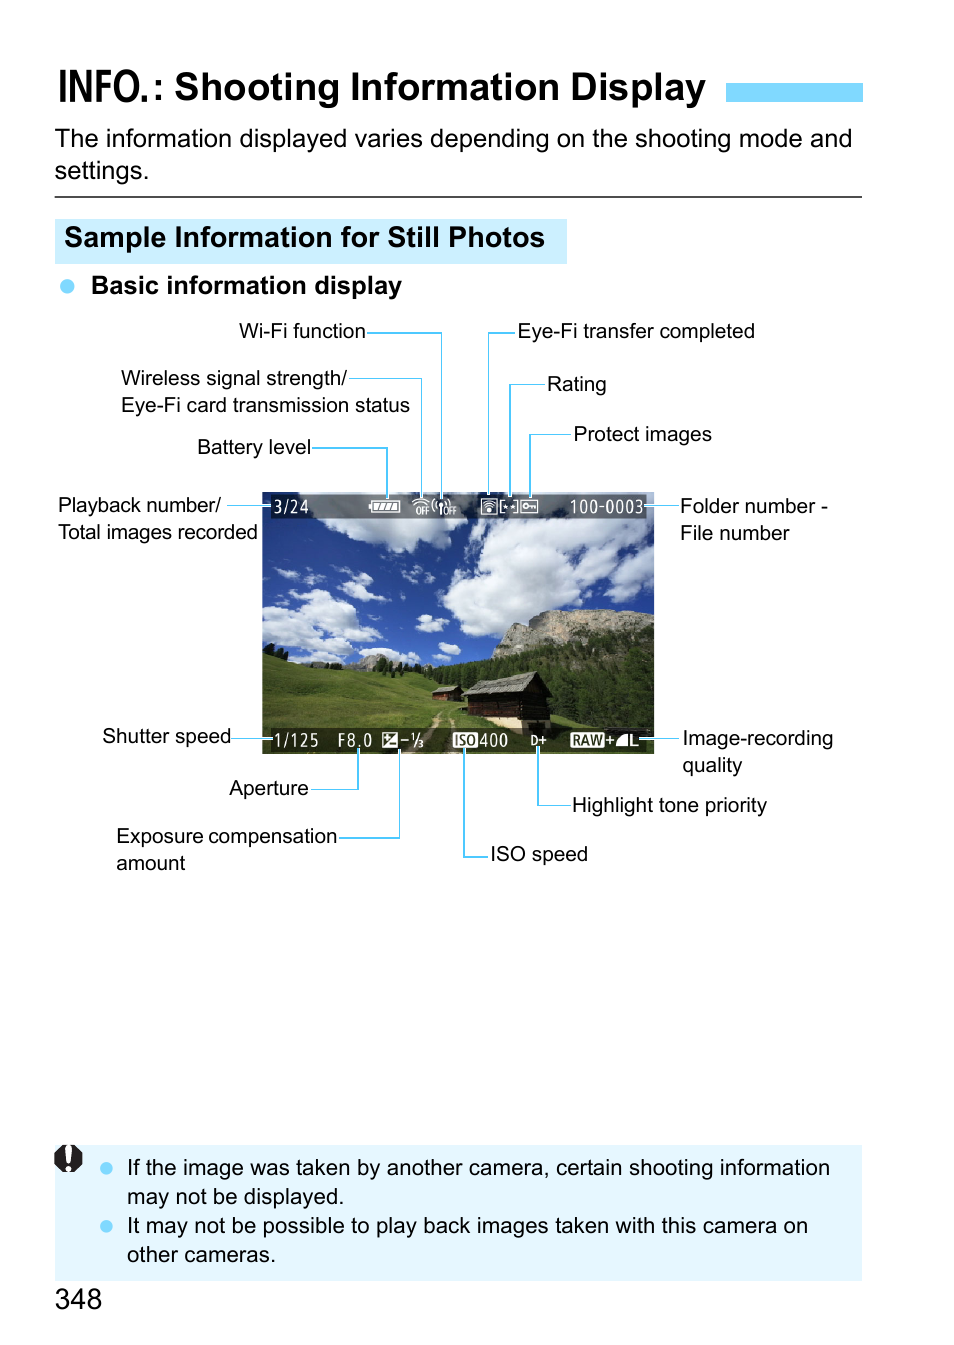 Shooting information display, B: shooting information display, Sample information for still photos | Canon EOS 80D User Manual | Page 348 / 526